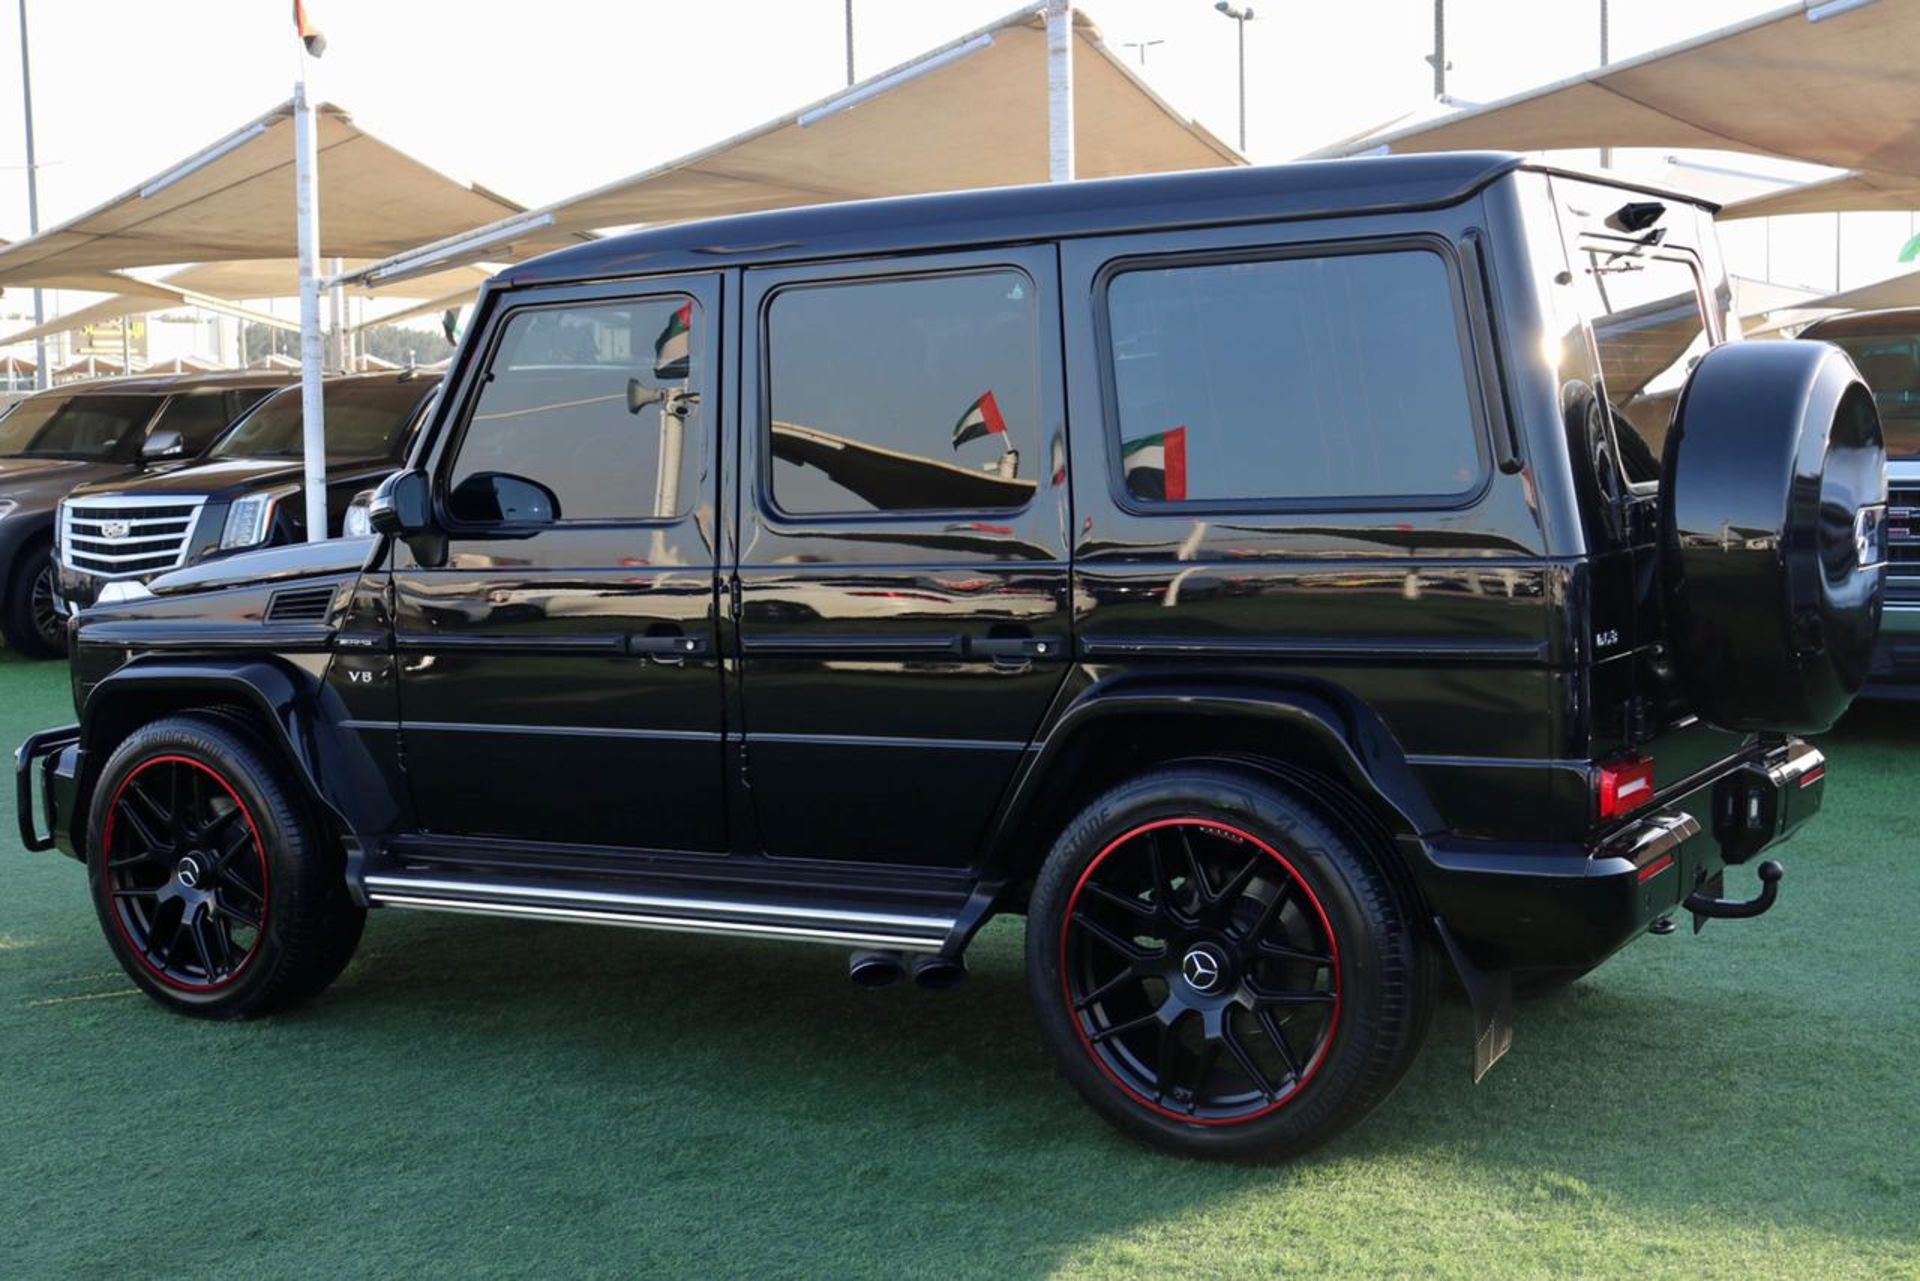 2011 MERCEDES G WAGON G55 changed to a 2020 G63 look Full outside exterior complete package !! - Image 4 of 36